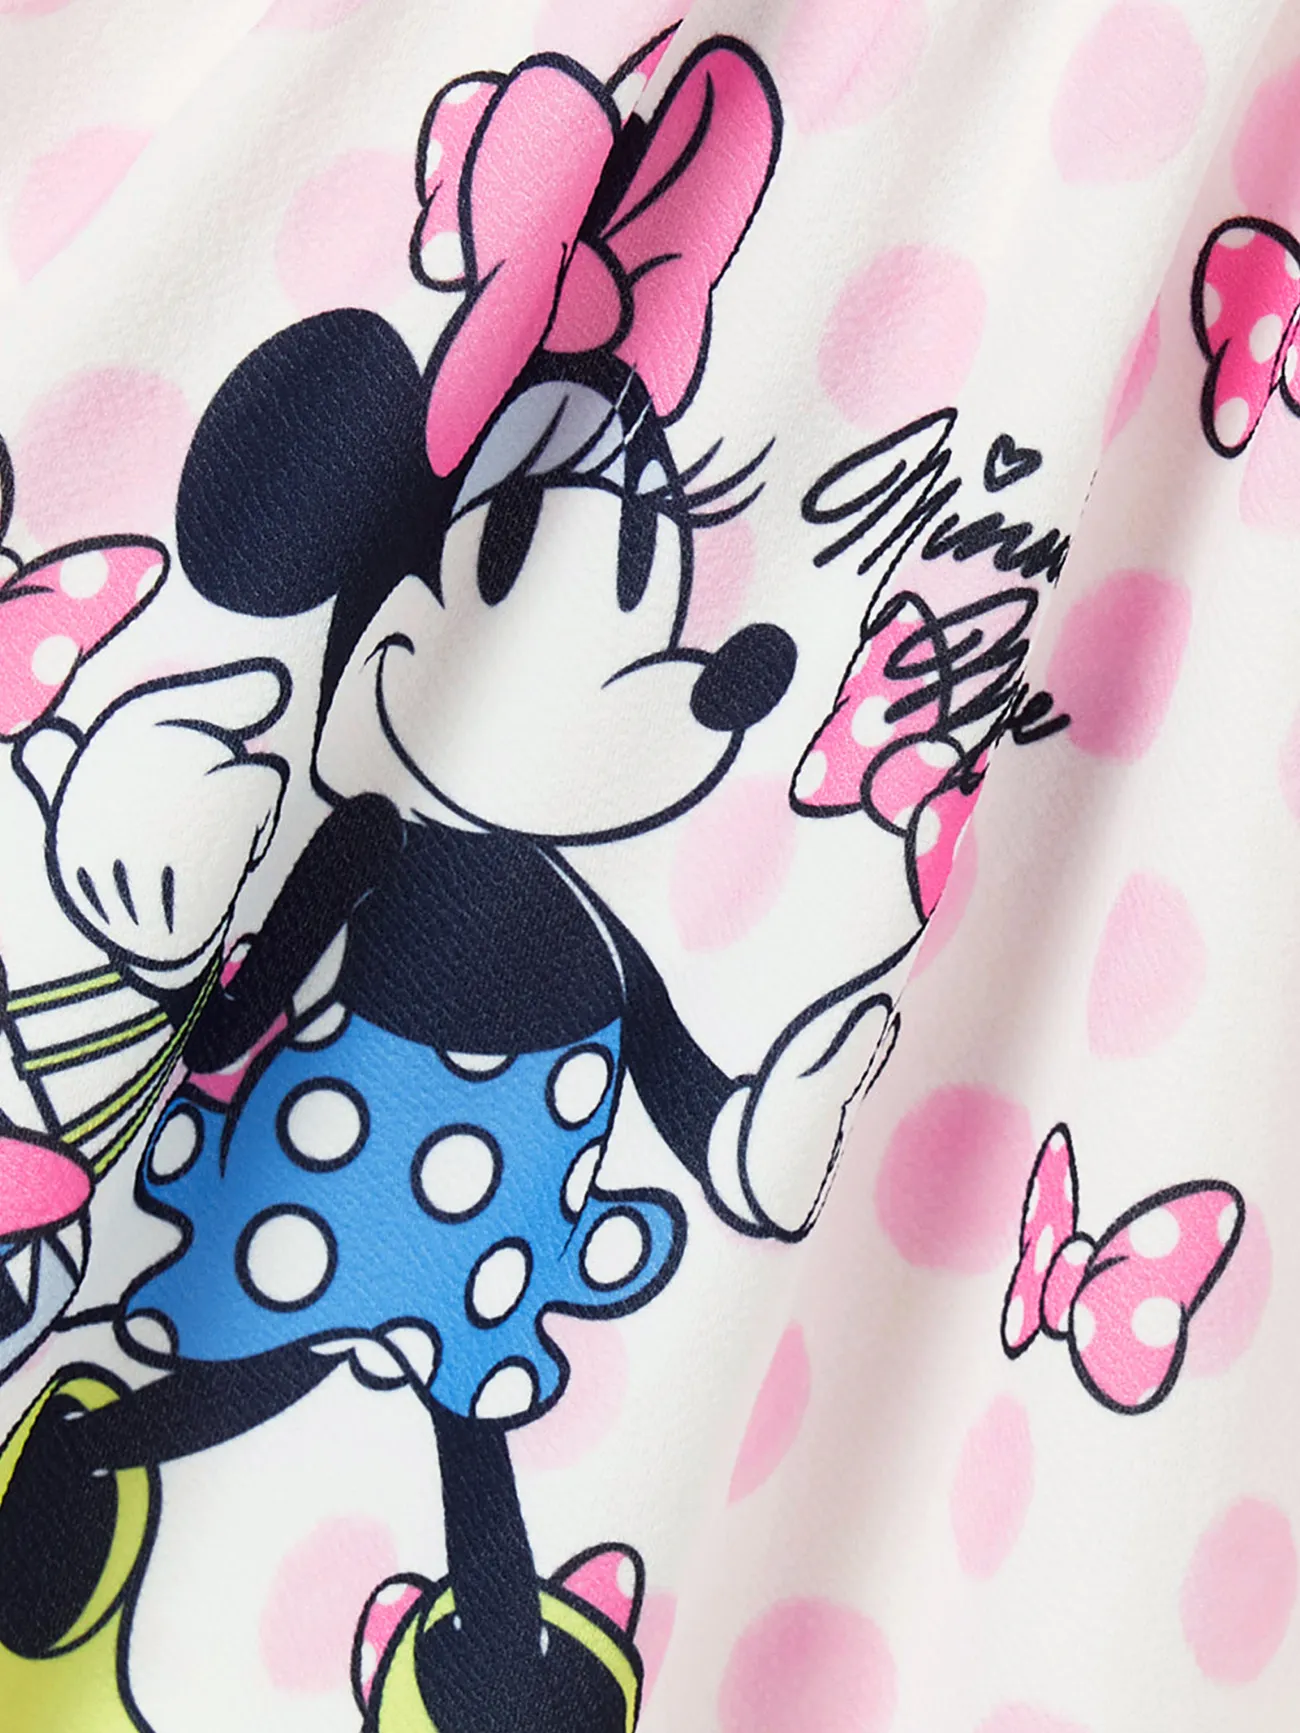 Disney Mickey and Friends Mommy and Me Sweet Bow Polka dots Print Sleeveless Dress/Romper PinkyWhite big image 1